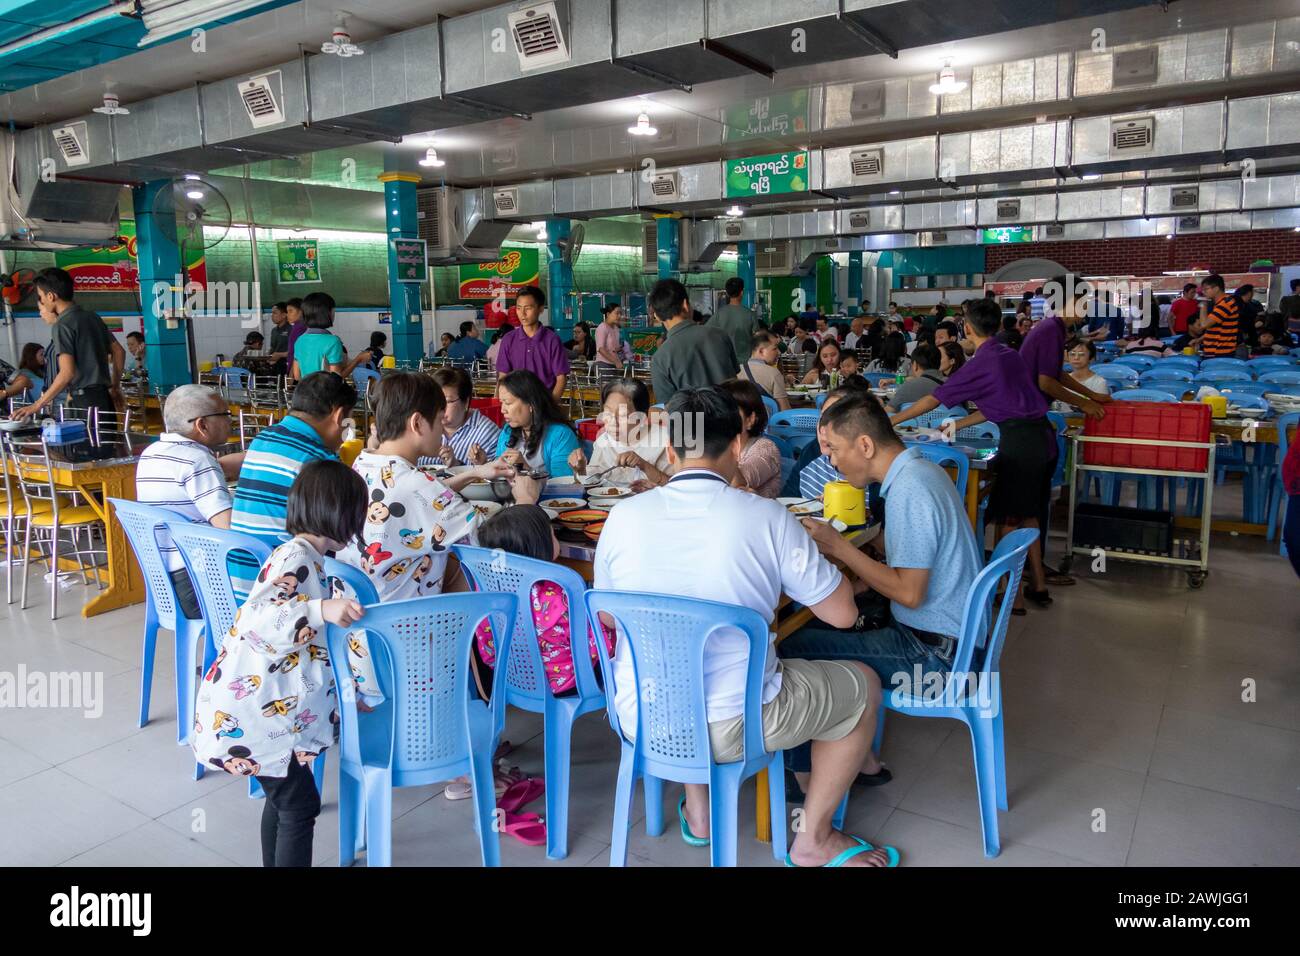 PATHEIN, MYANMAR - JANUARY 26, 2020: Unidentified people eating at a big restaurant in Pathein, the largest city and capital of Ayeyarwady Region. Stock Photo